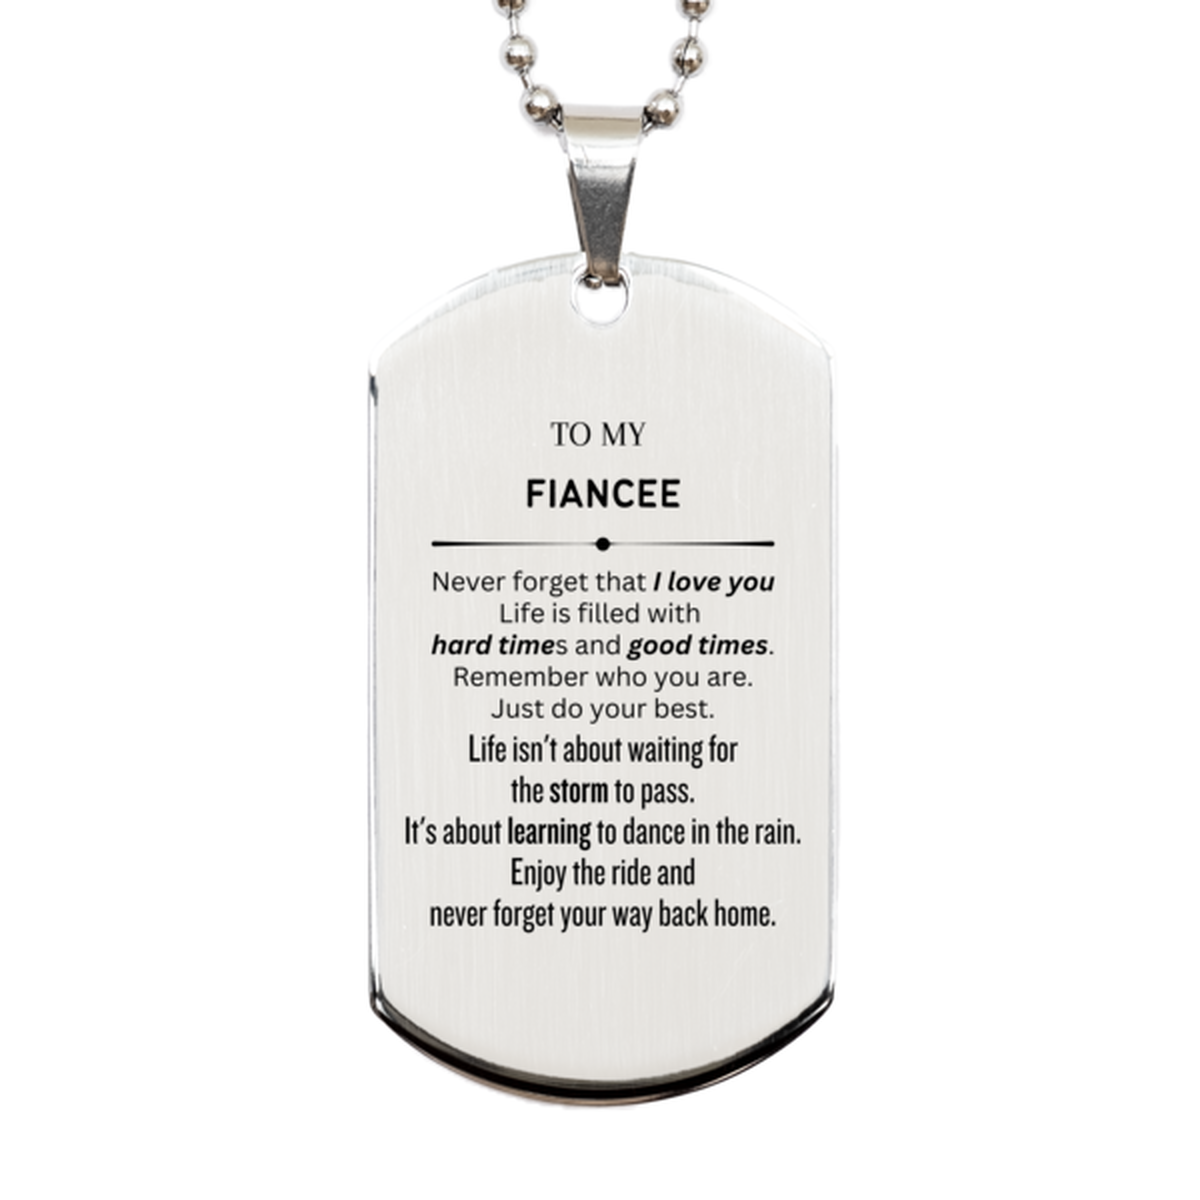 Christmas Fiancee Silver Dog Tag Gifts, To My Fiancee Birthday Thank You Gifts For Fiancee, Graduation Unique Gifts For Fiancee To My Fiancee Never forget that I love you life is filled with hard times and good times. Remember who you are. Just do your be